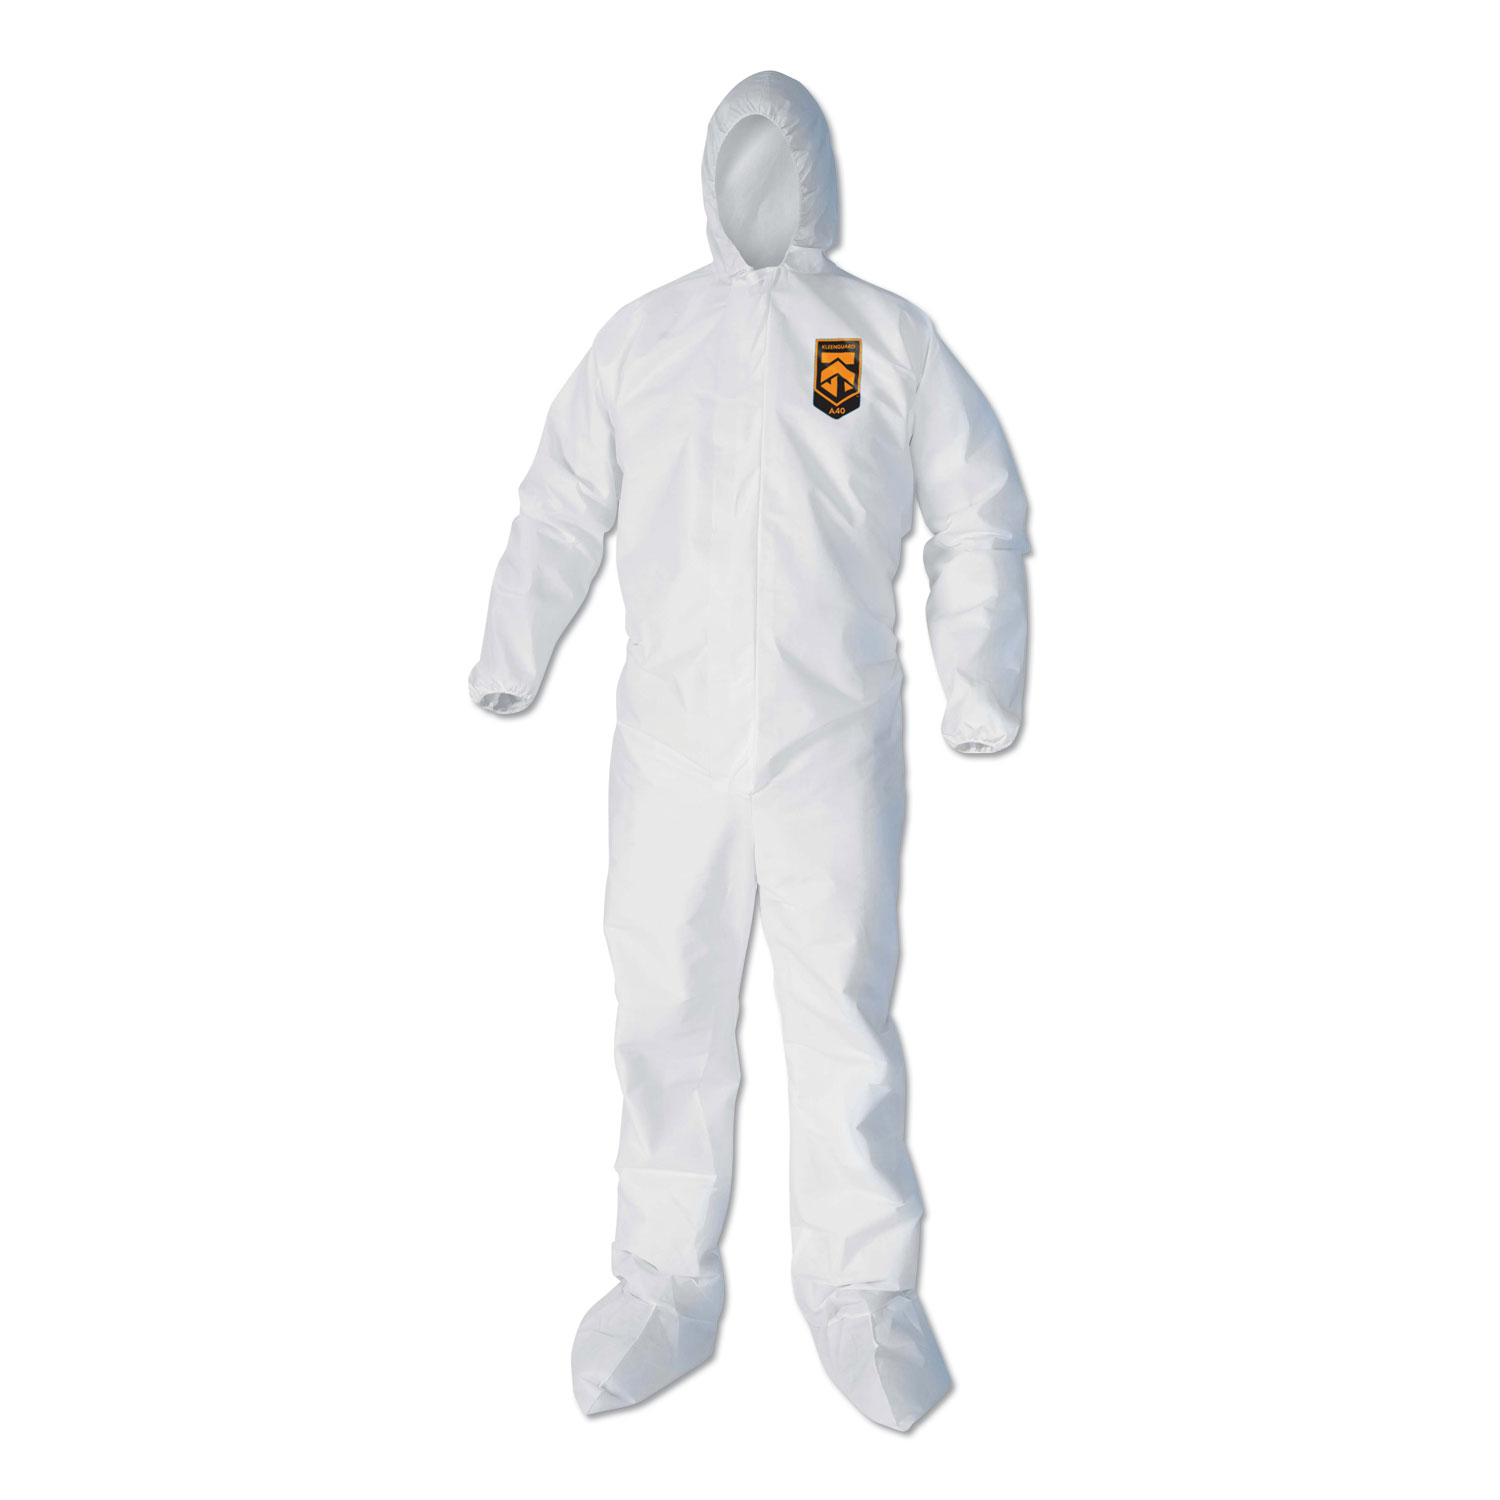  KleenGuard KCC 44335 A40 Elastic-Cuff, Ankle, Hood & Boot Coveralls, White, 2X-Large, 25/Carton (KCC44335) 